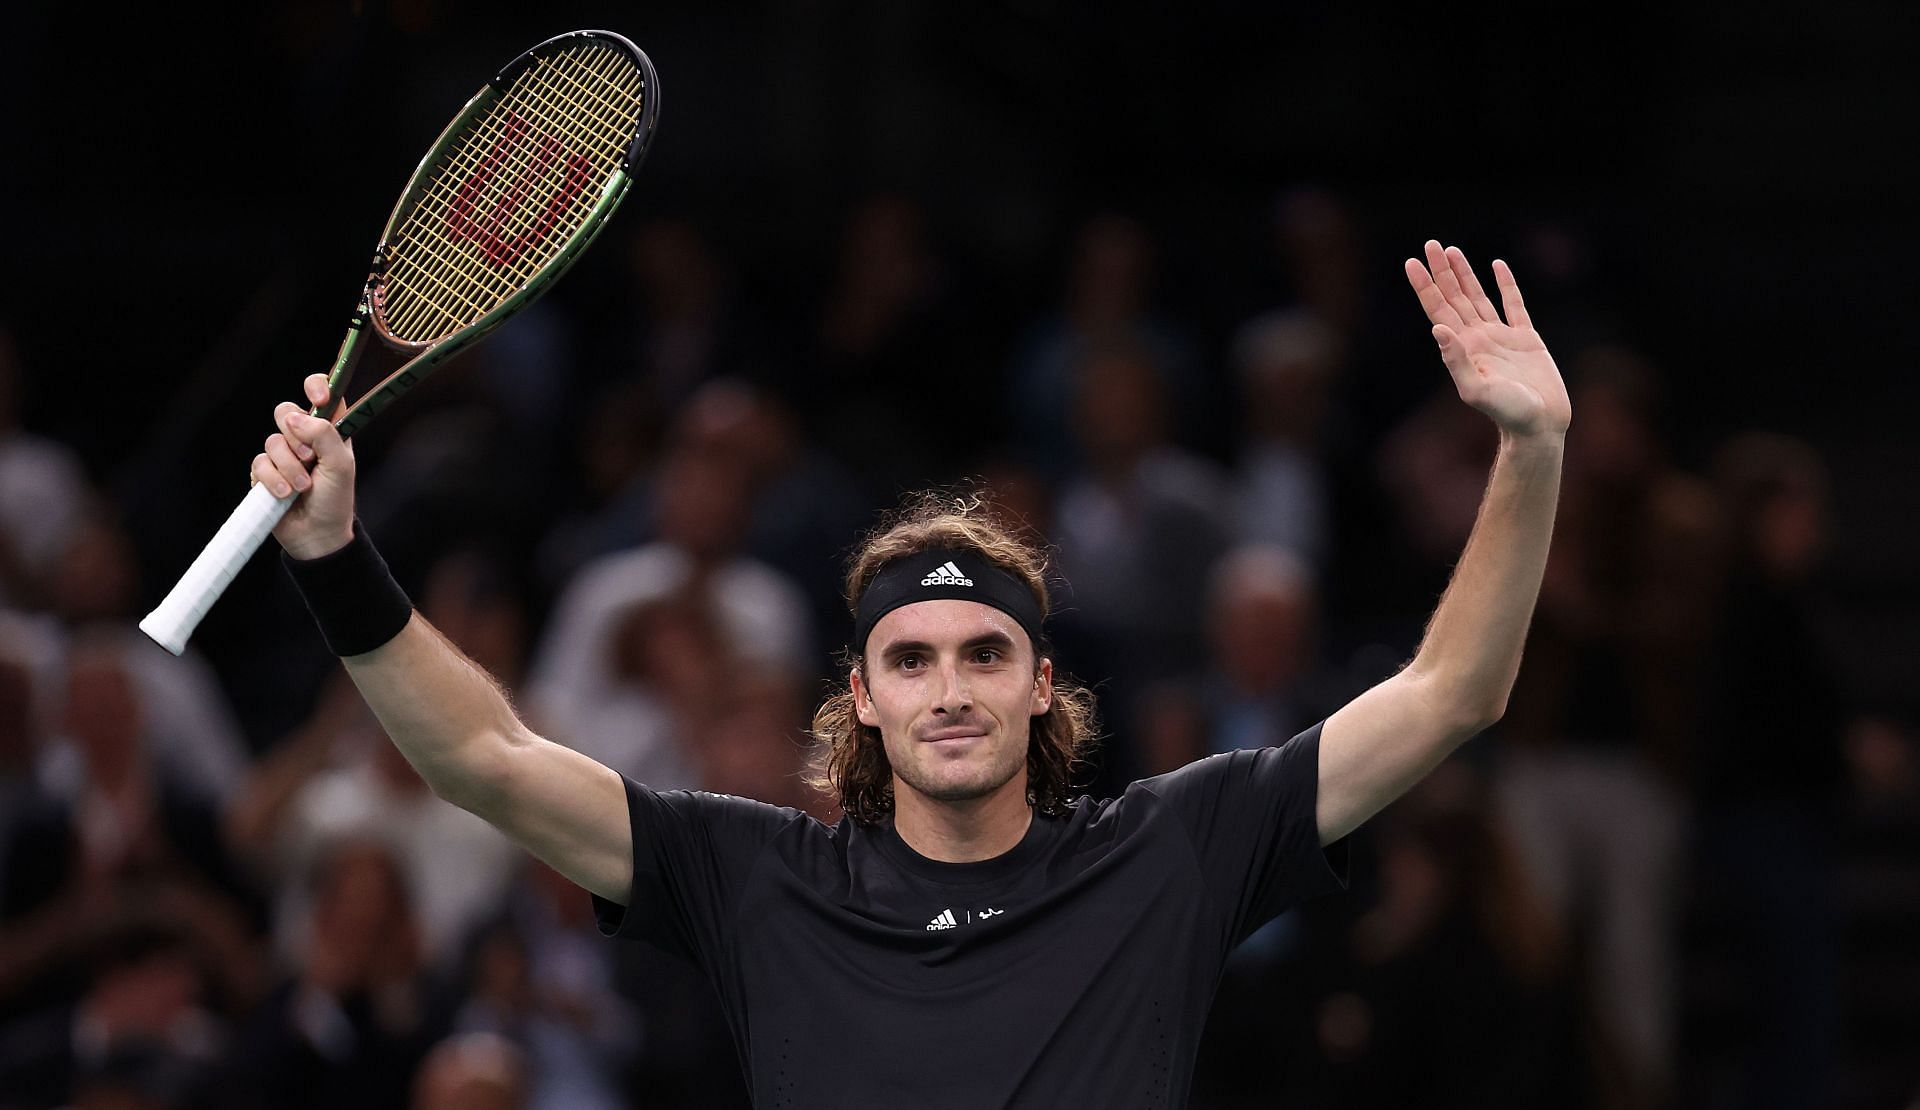 Stefanos Tsitsipas was supporting Argentina